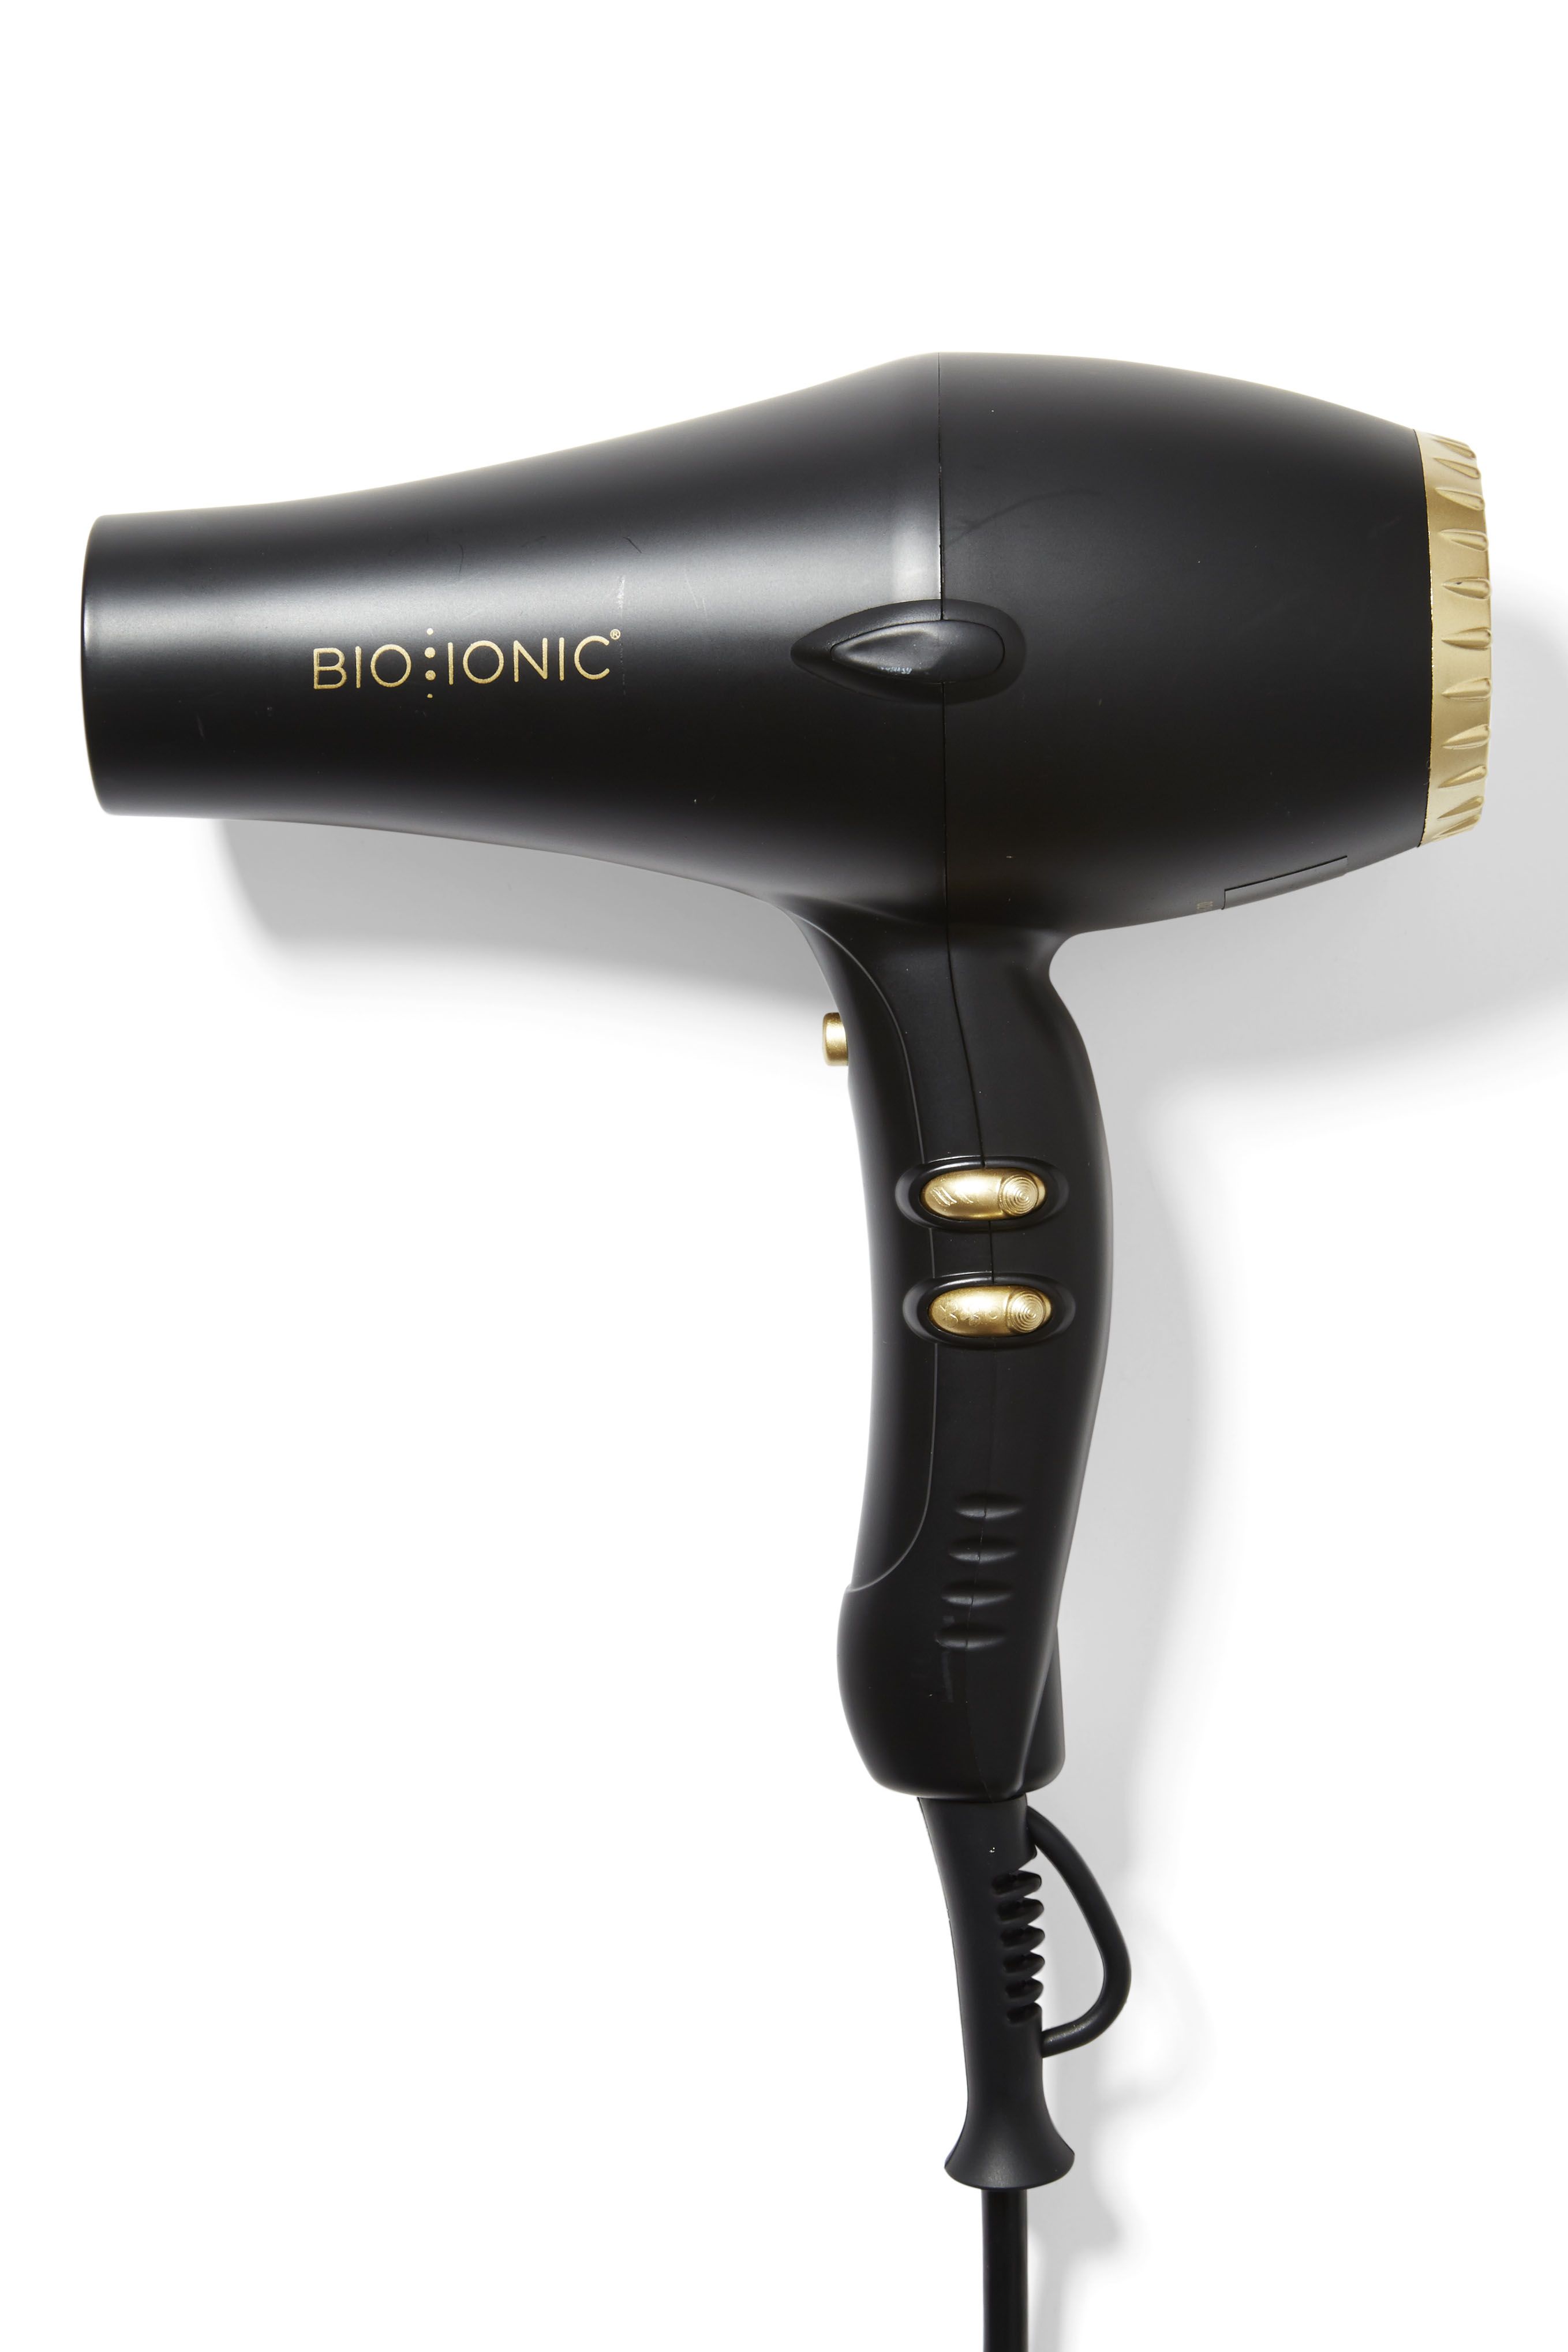 15 Best Hair Dryers 2018 Top Rated Blow Dryer Reviews